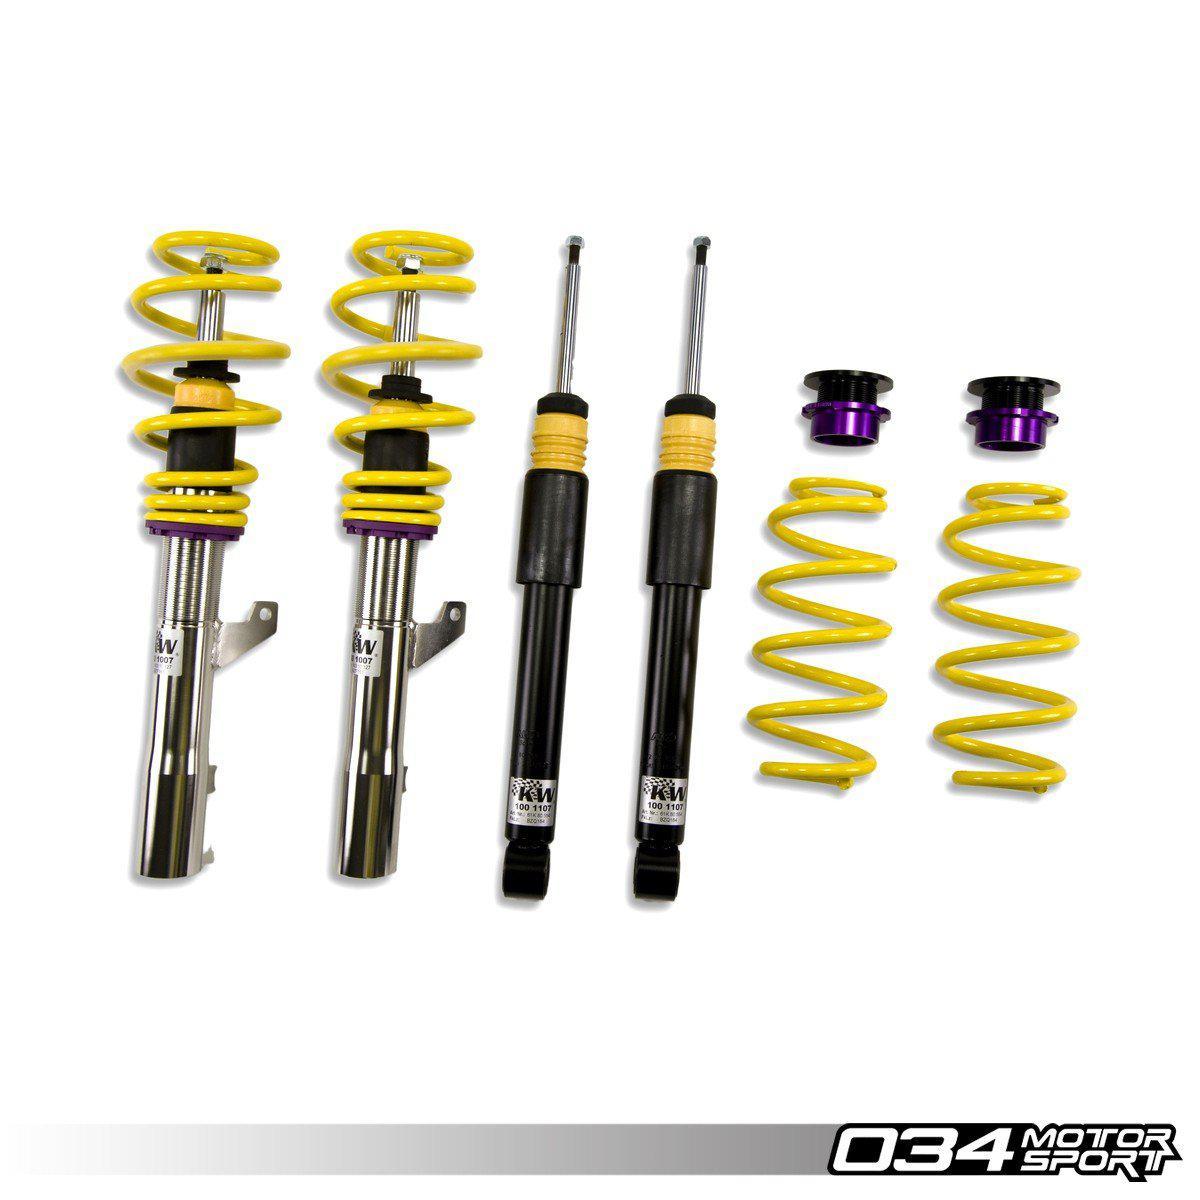 KW Variant 1 Coilover Suspension, B8 Audi A4/S4 Avant Quattro With Edc-A Little Tuning Co